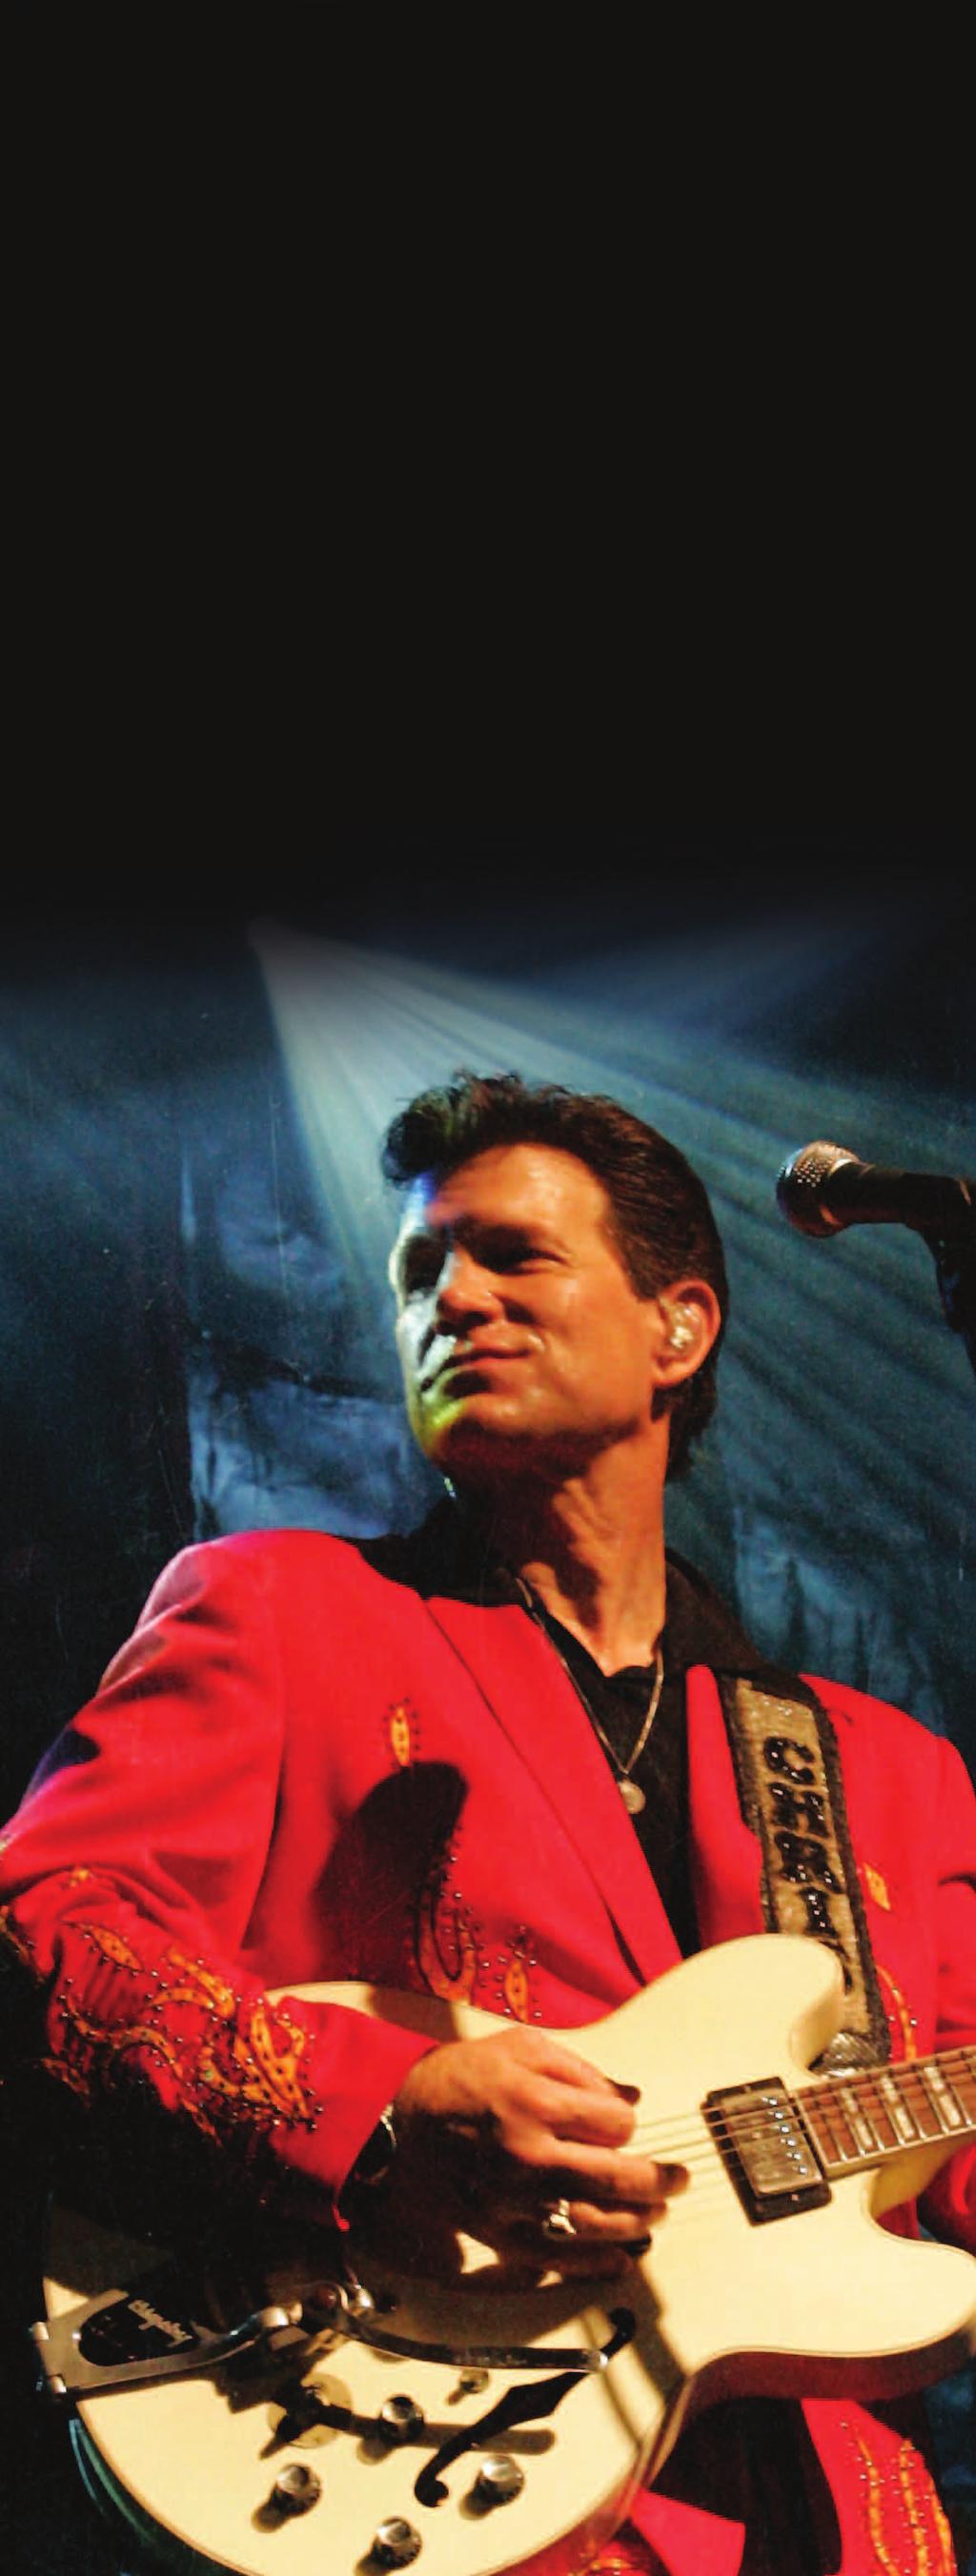 ABSOLUTE OPUS CHRIS ISAAK SHOW Back by popular demand for his second consecutive year, Chris Isaak will entertain guests with an intimate performance at s outdoor ampitheatre in support of his latest